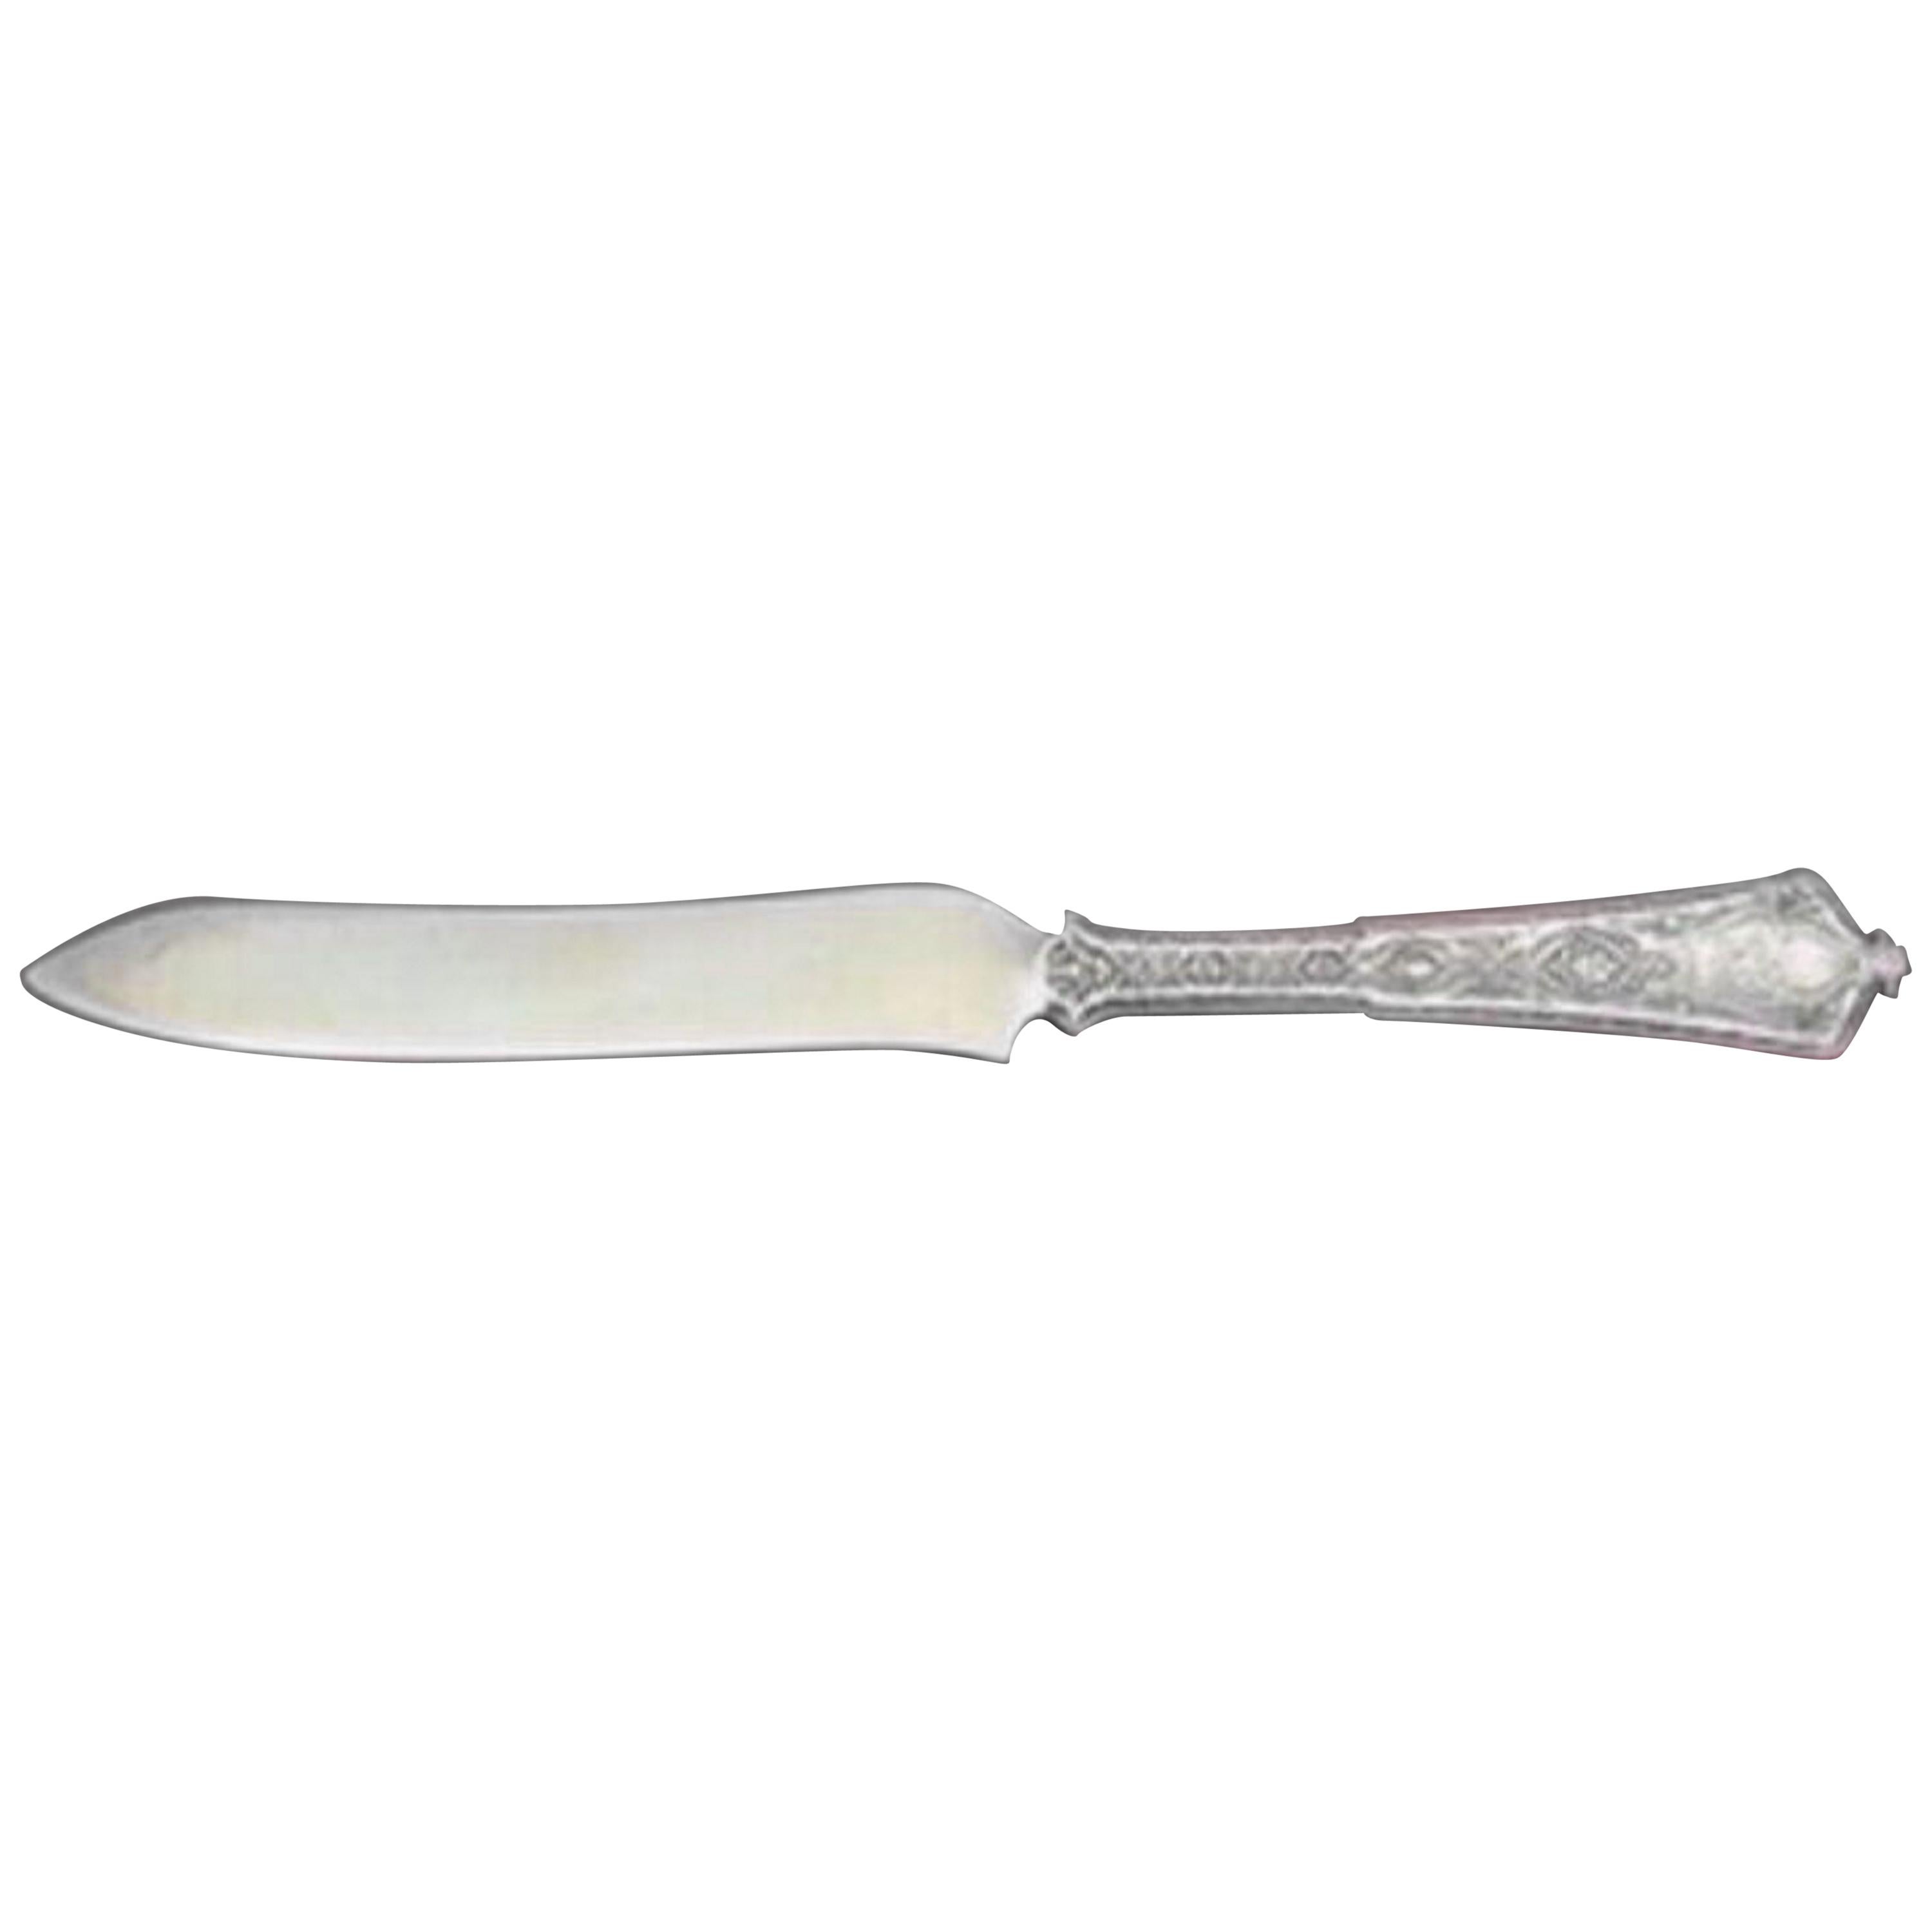 Persian by Tiffany & Co. Sterling Silver Fish Knife Pointed